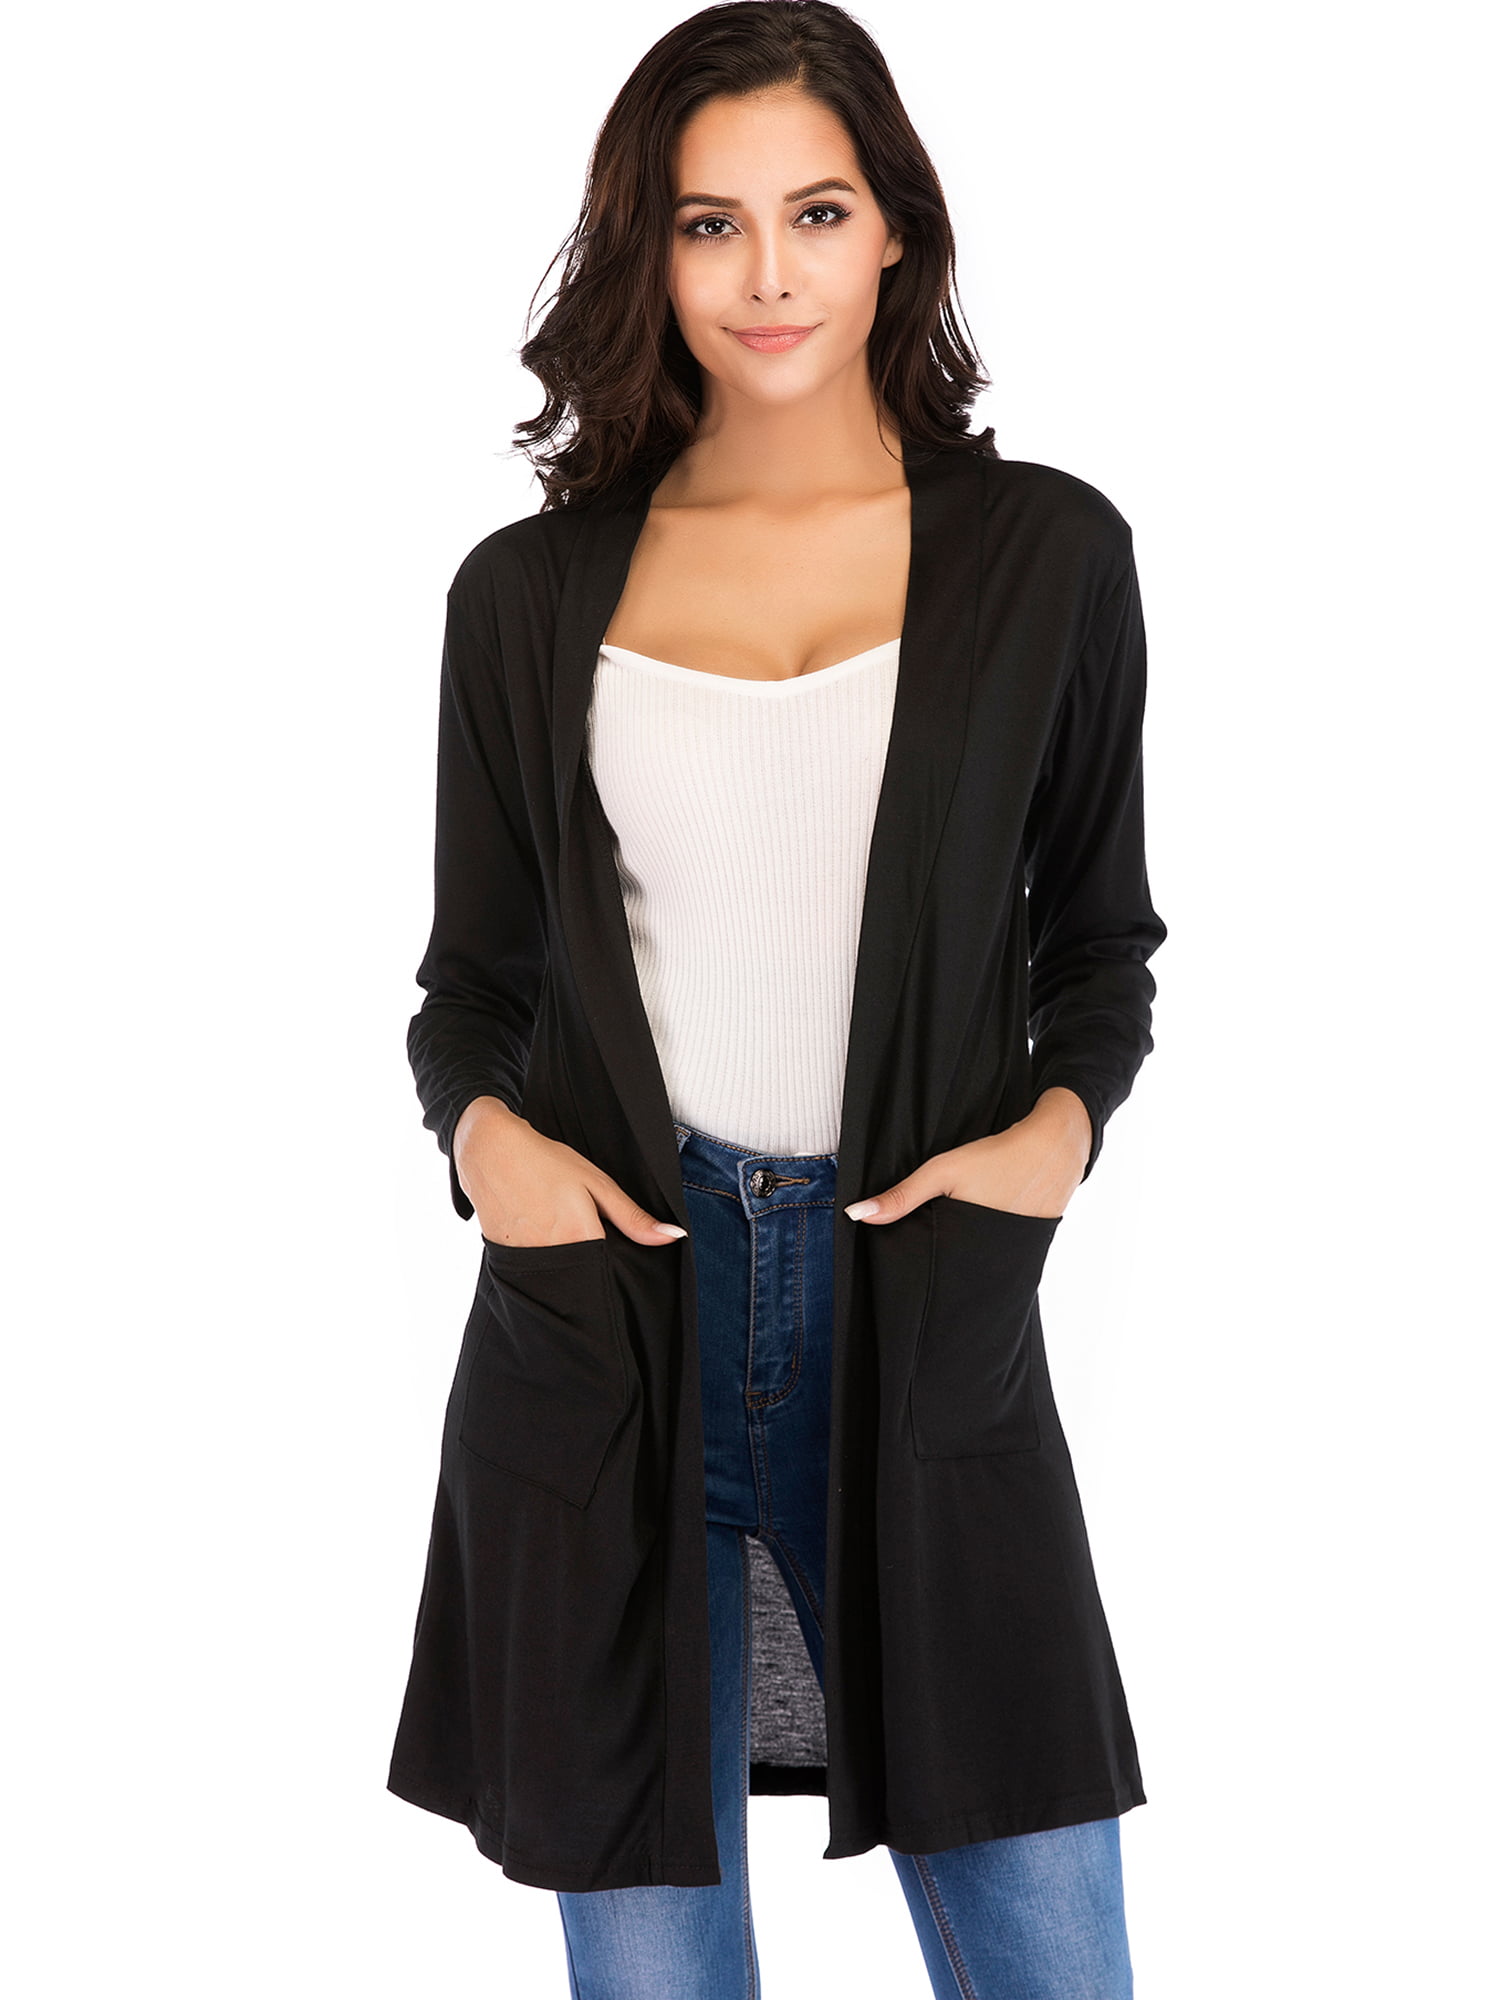 New Womens Open Front Knee Length Plain Cardigan Long Sleeve Party Casual Top 